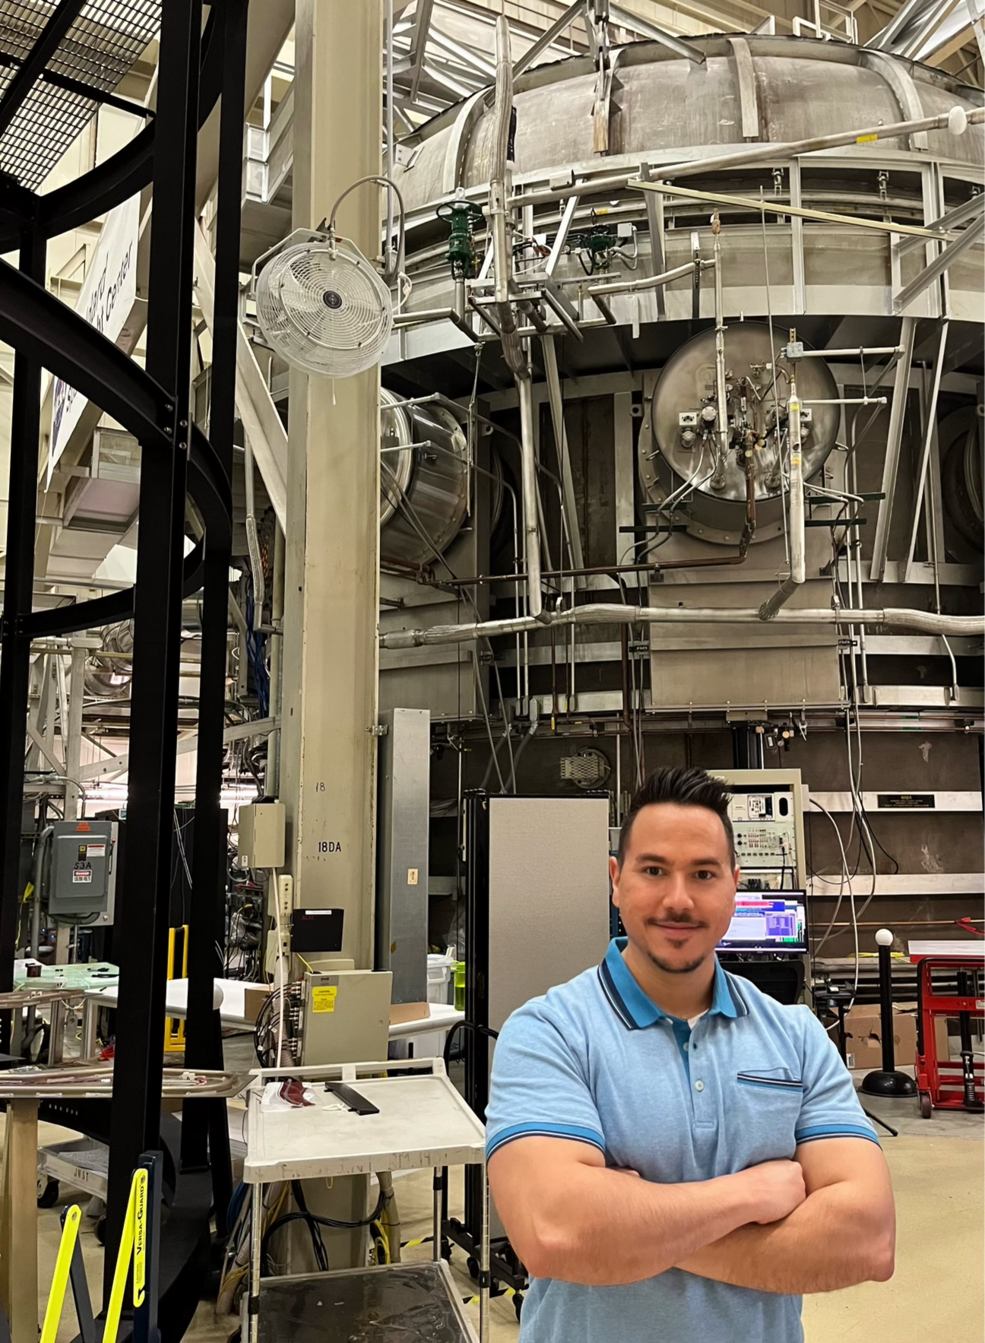 Javier Ocasio-PÃ©rez, a man with dark hair and dark beard and mustache, smiles and stands with arms crossed in front of a test chamber at Goddard, which looks like a large silver cylinder with many silver valves and pipes.